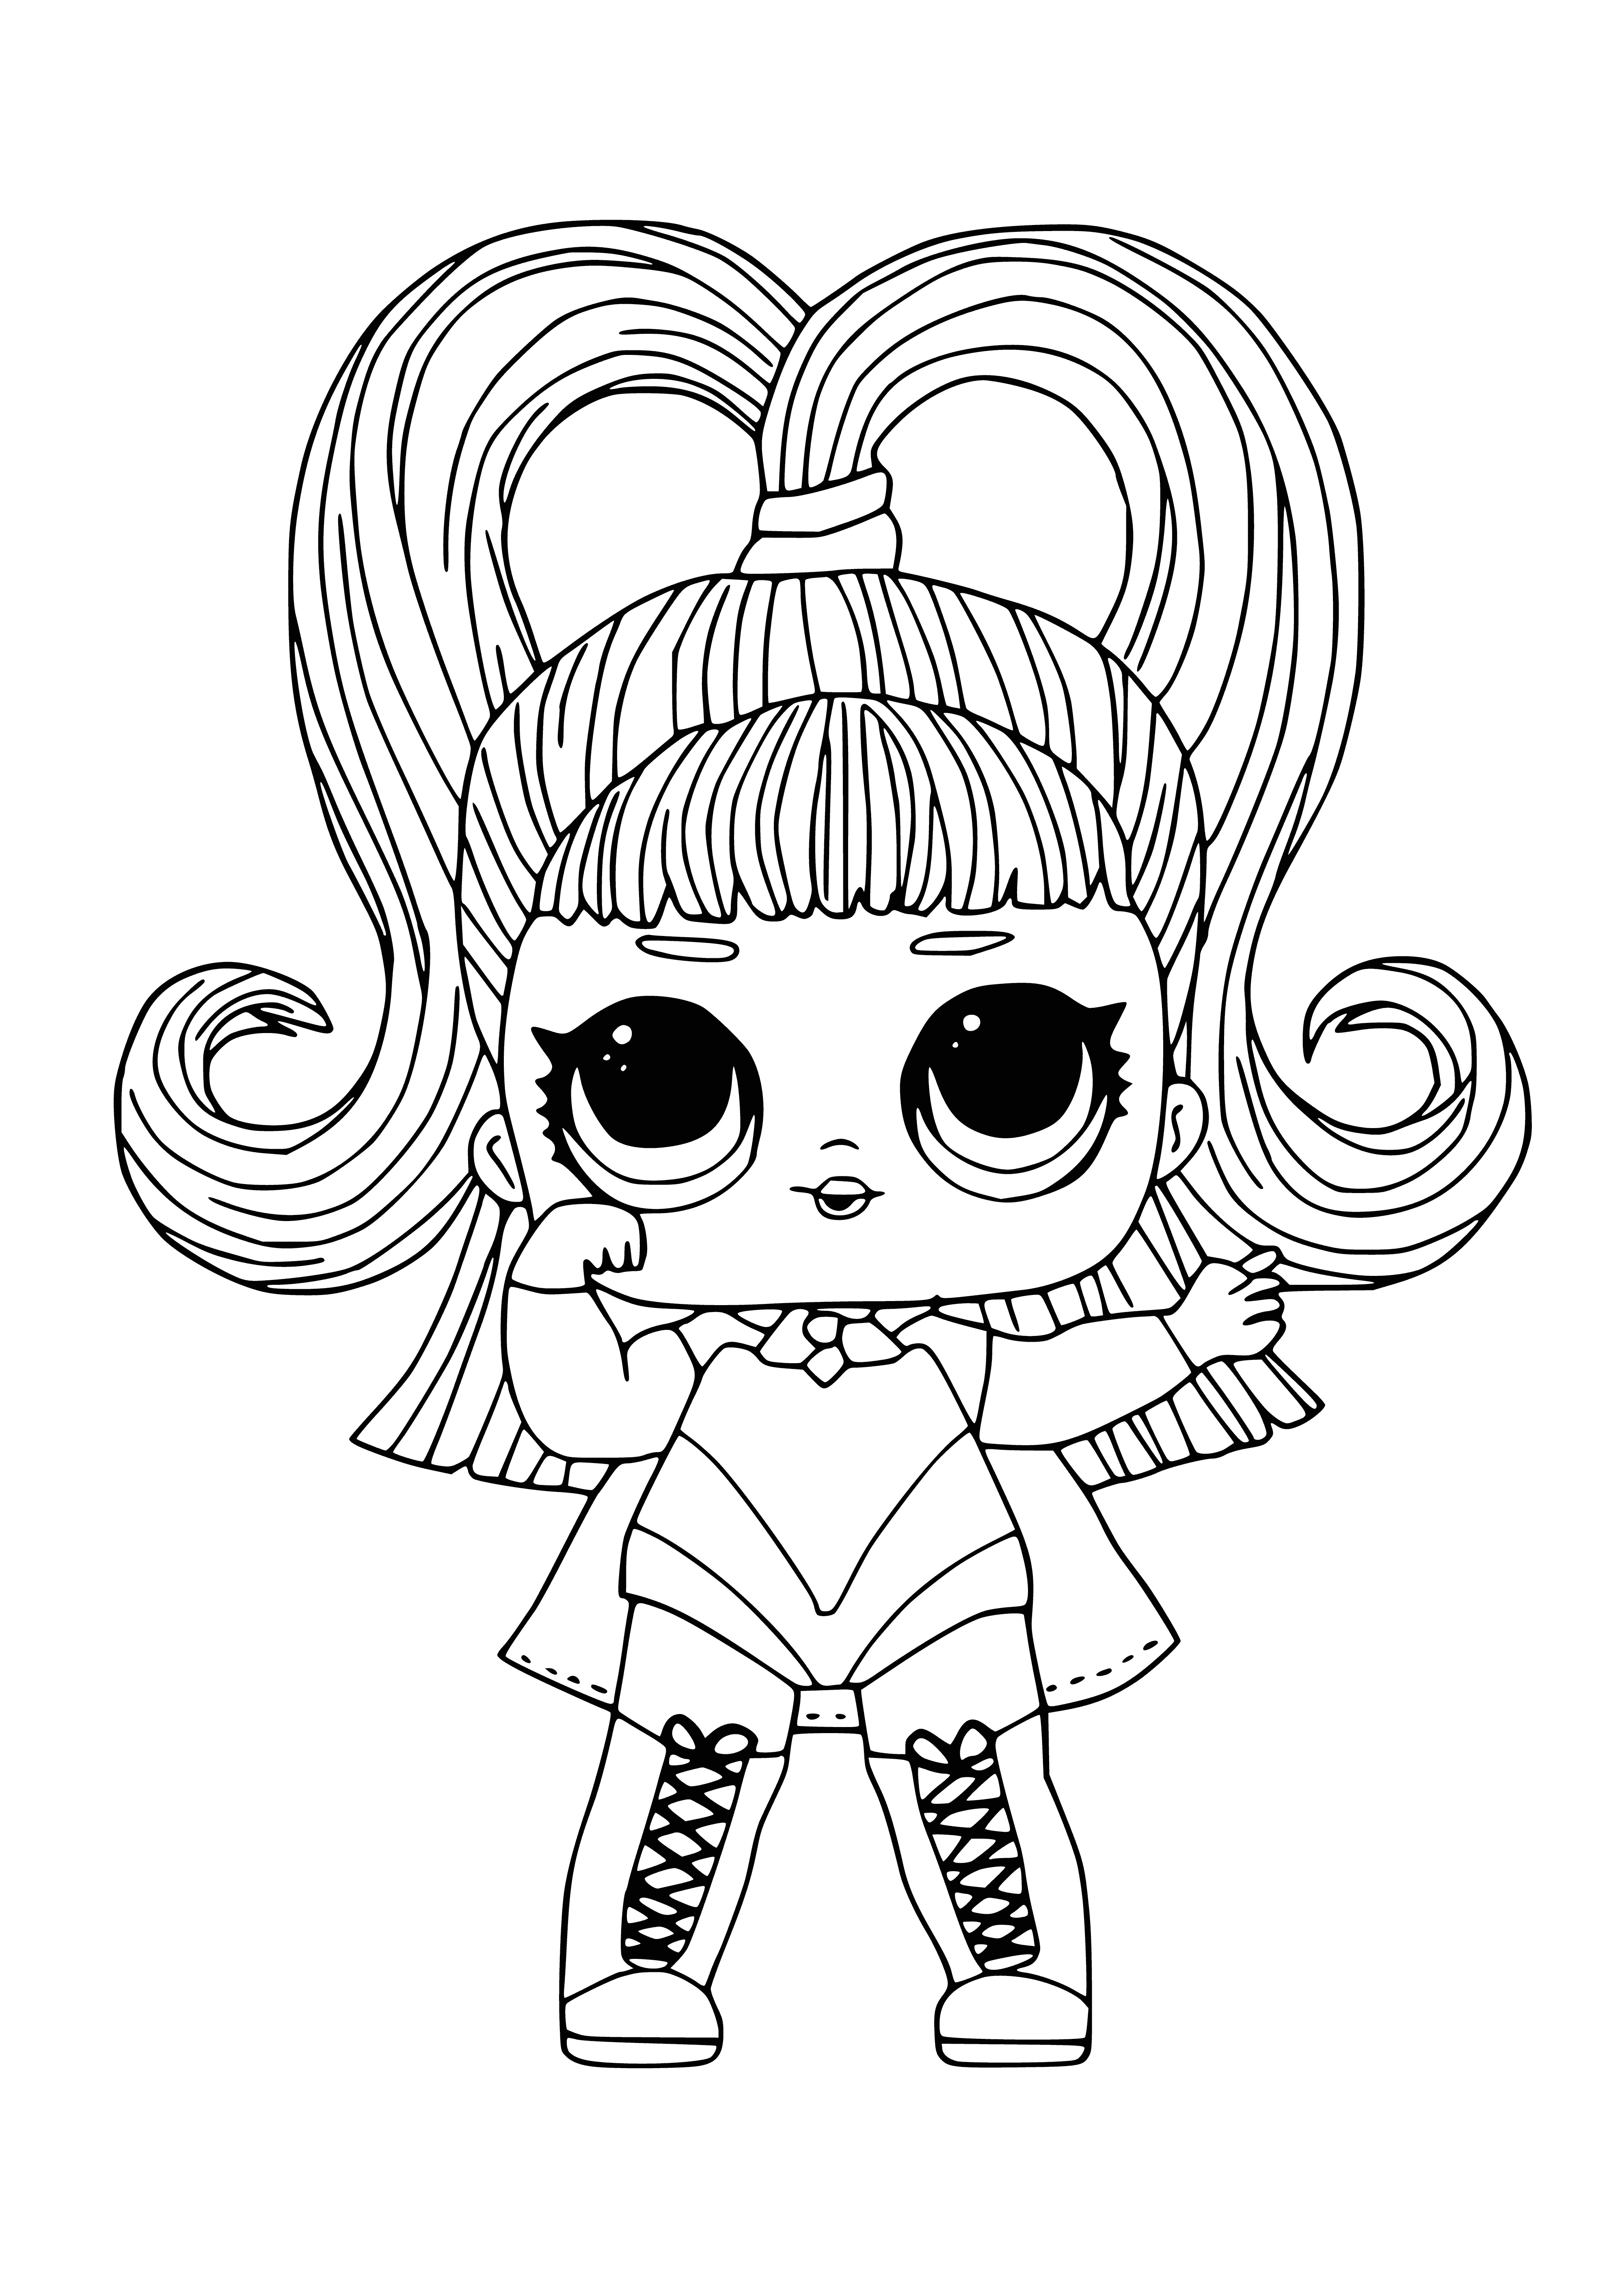 coloring page: Girl in pink with curly hair & blue ball; bow in hair; shirt reads "LOL".